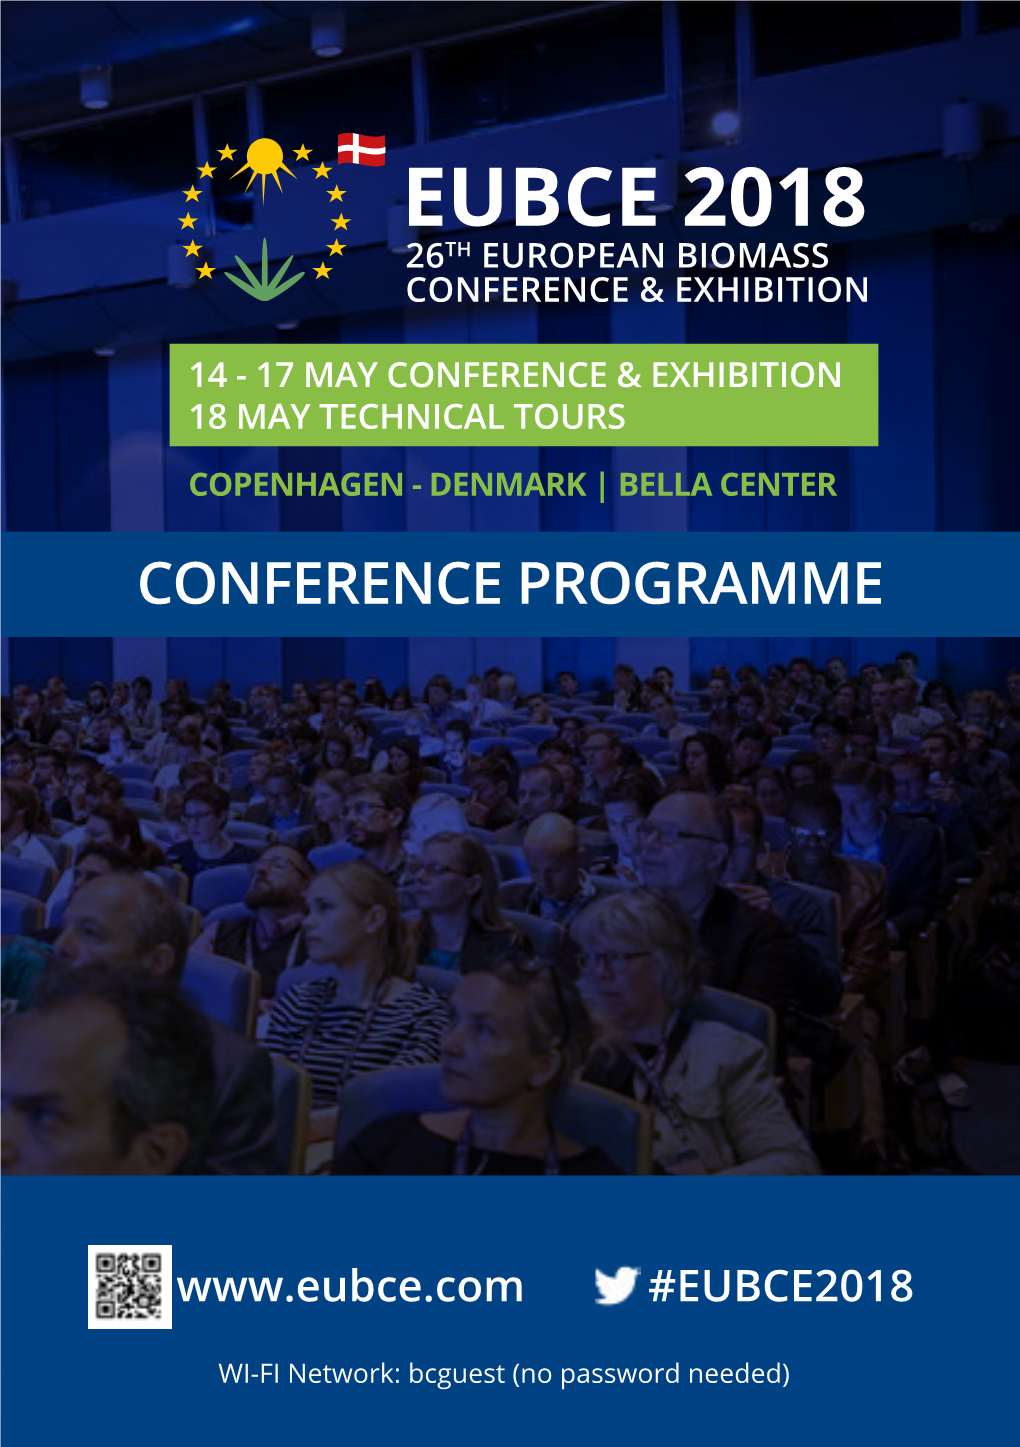 Eubce 2018 26Th European Biomass Conference & Exhibition